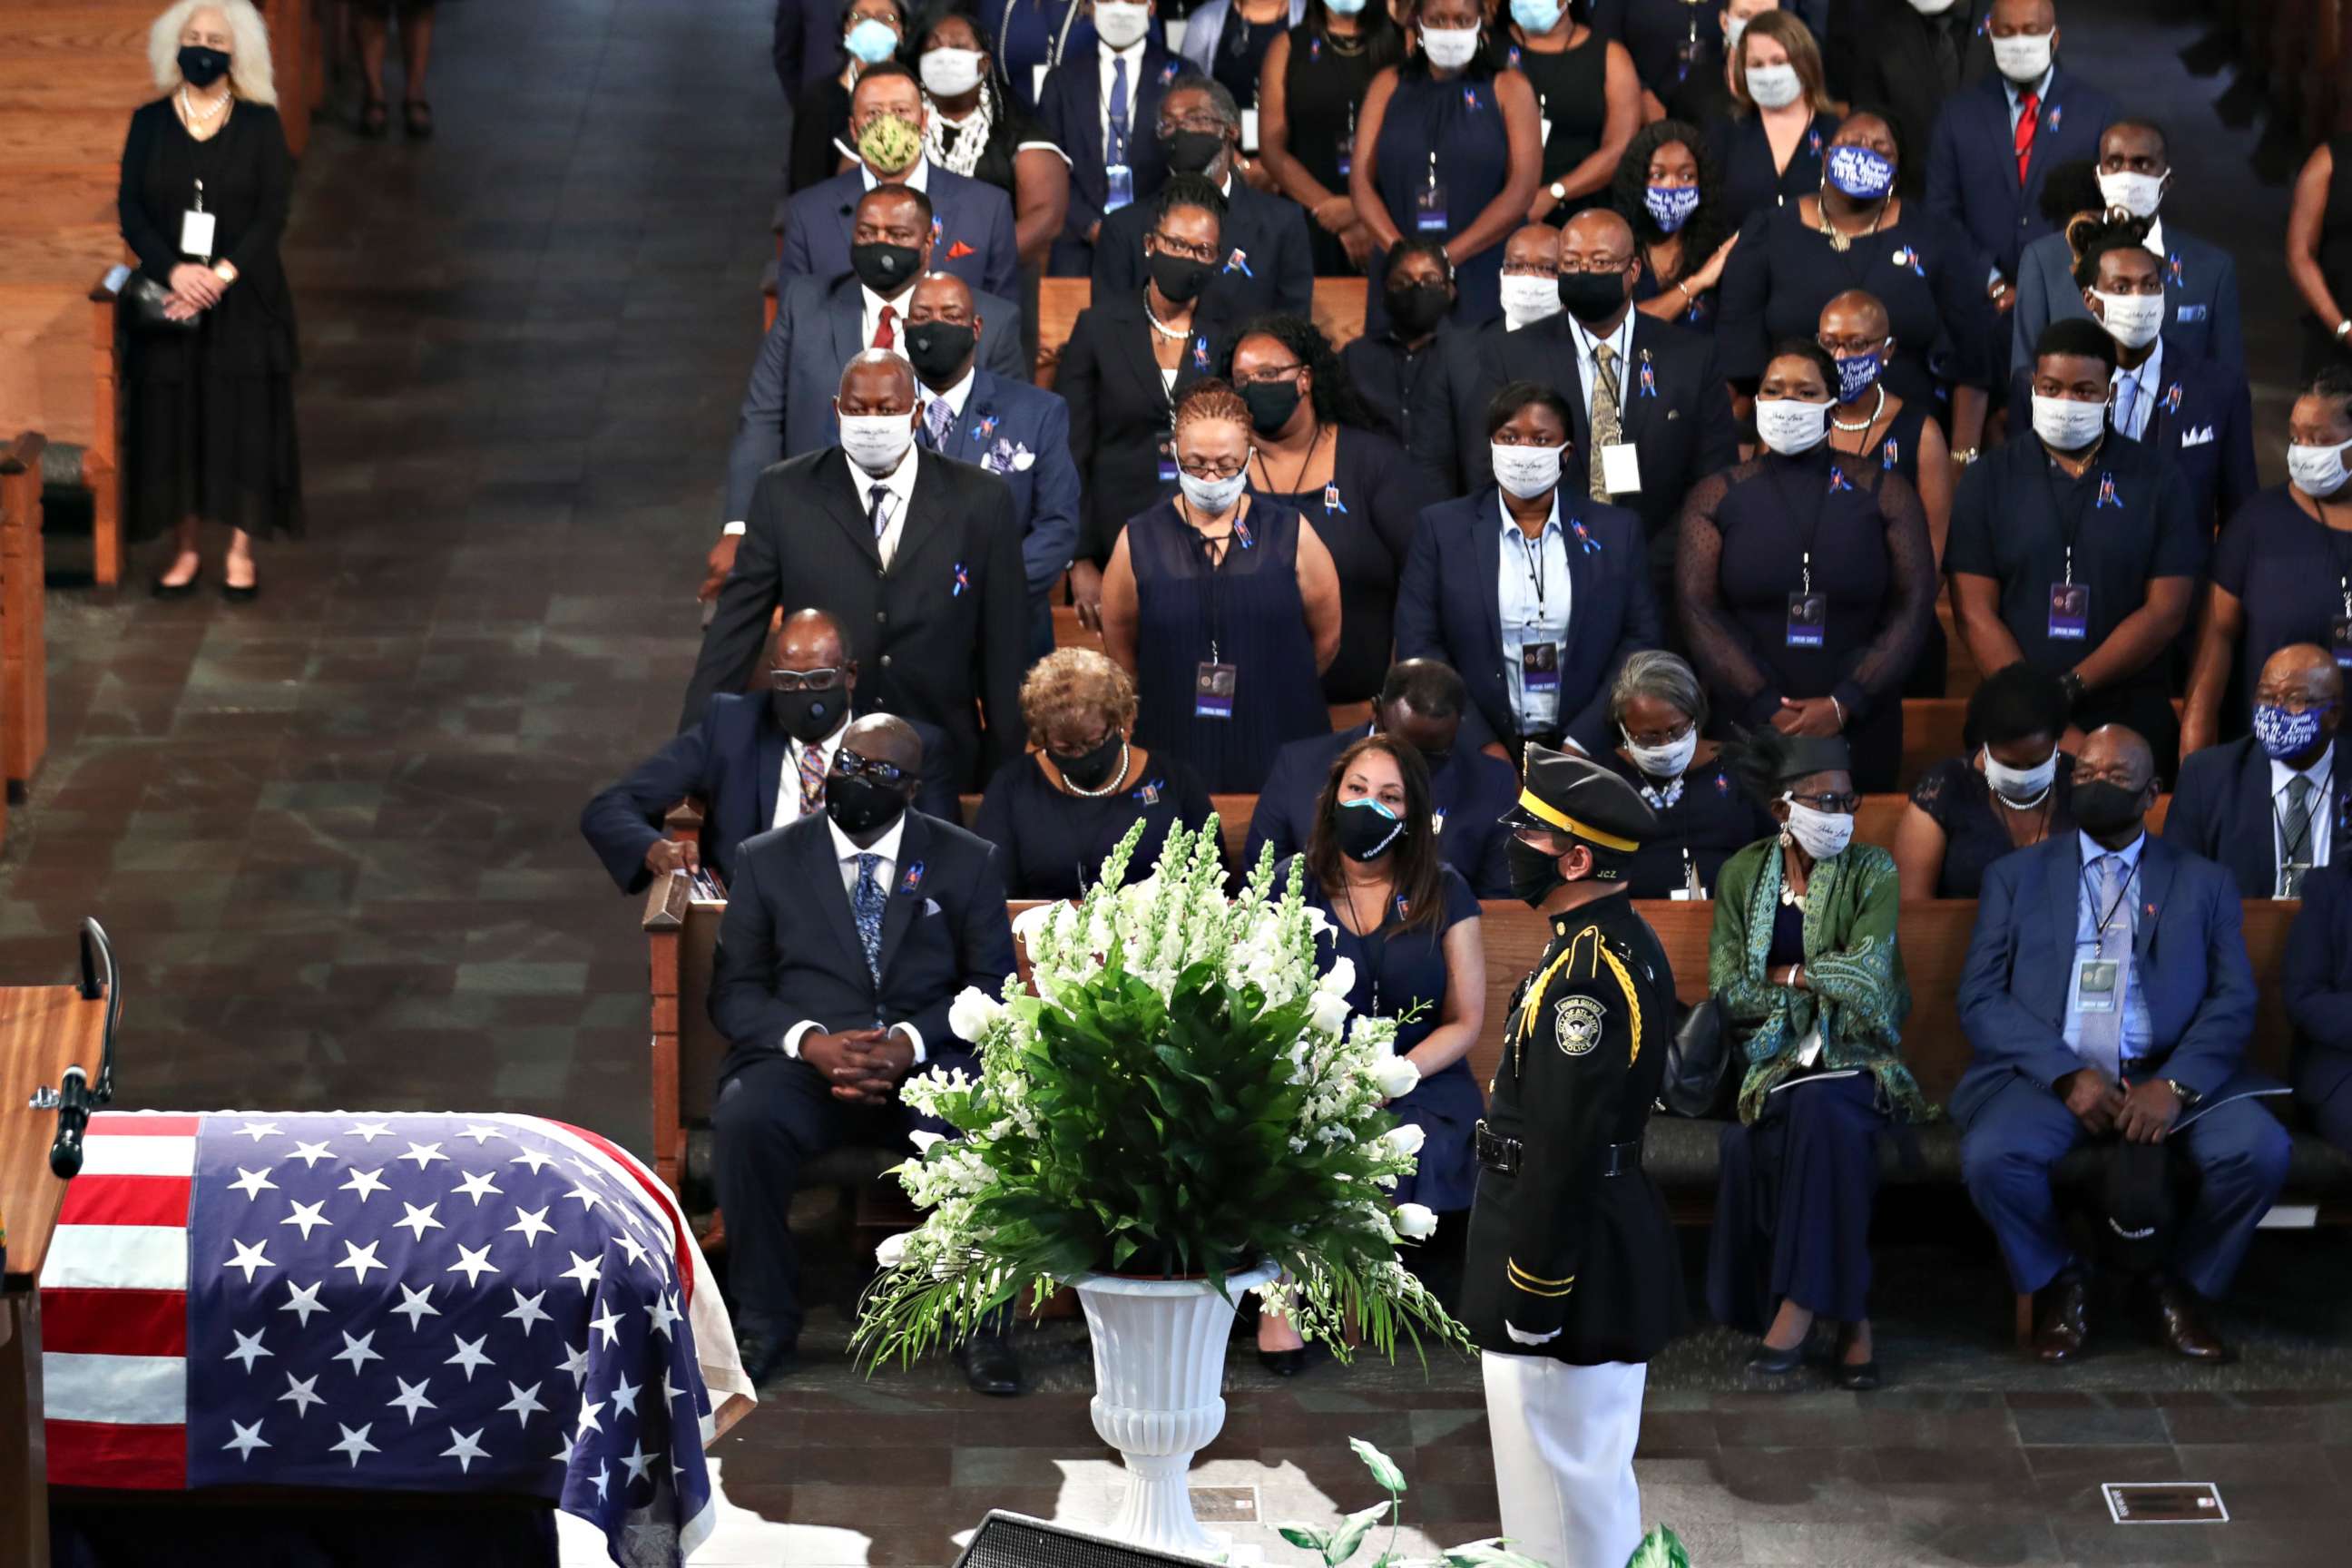 PHOTO: Mourners attend the funeral service for the late Rep. John Lewis at Ebenezer Baptist Church in Atlanta, July 30, 2020.